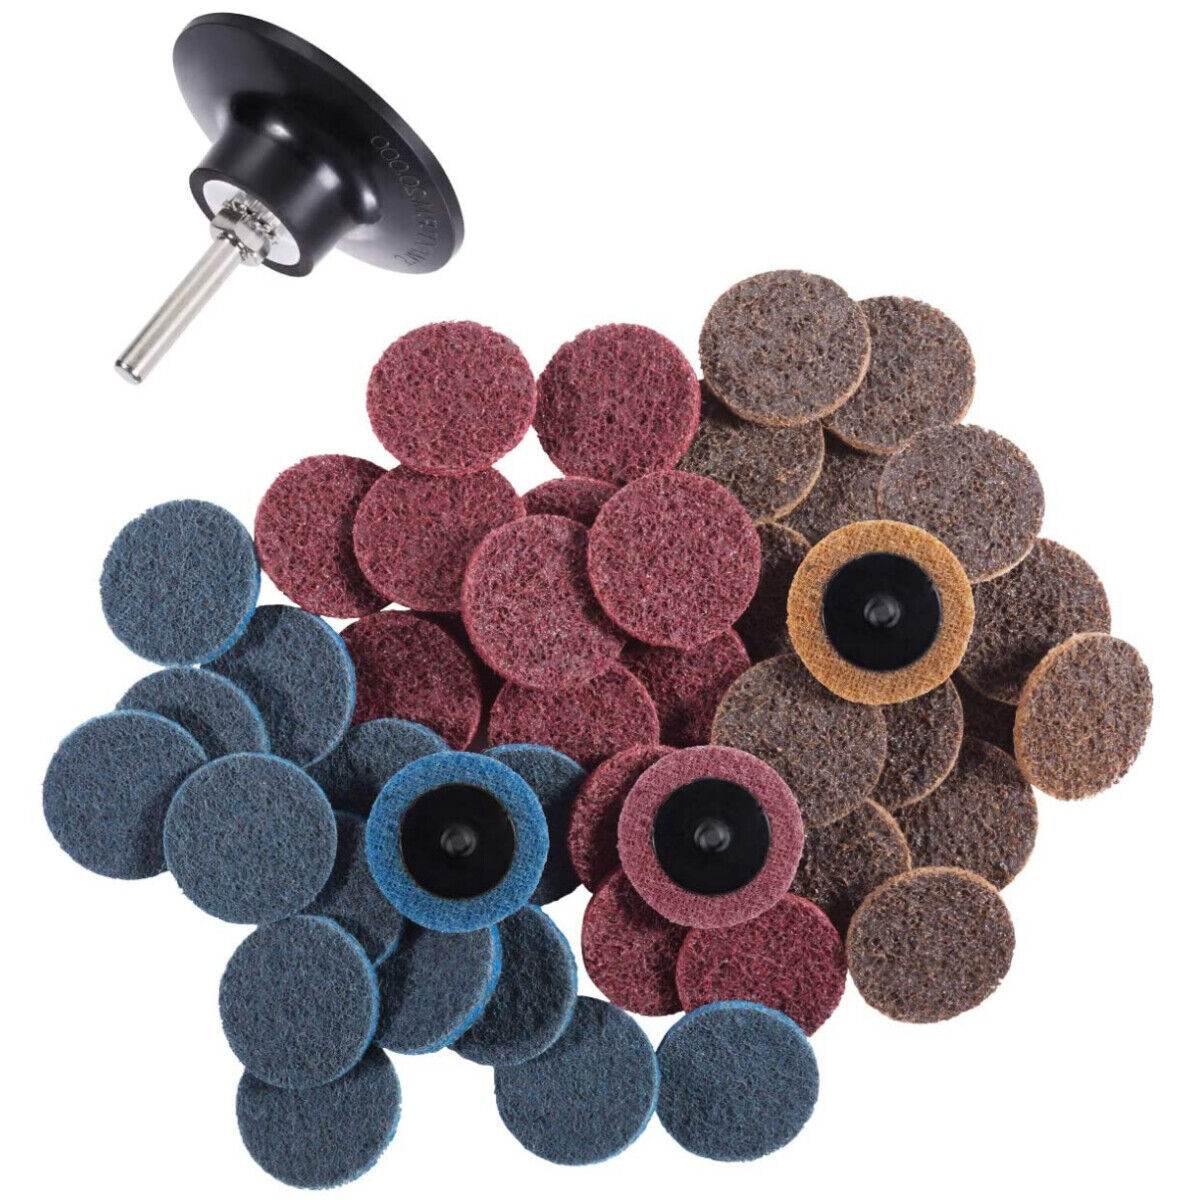 46PCS 2in Roll Lock Surface Conditioning Die Grinder Sanding Discs Set w/ Holder Satc Does Not Apply